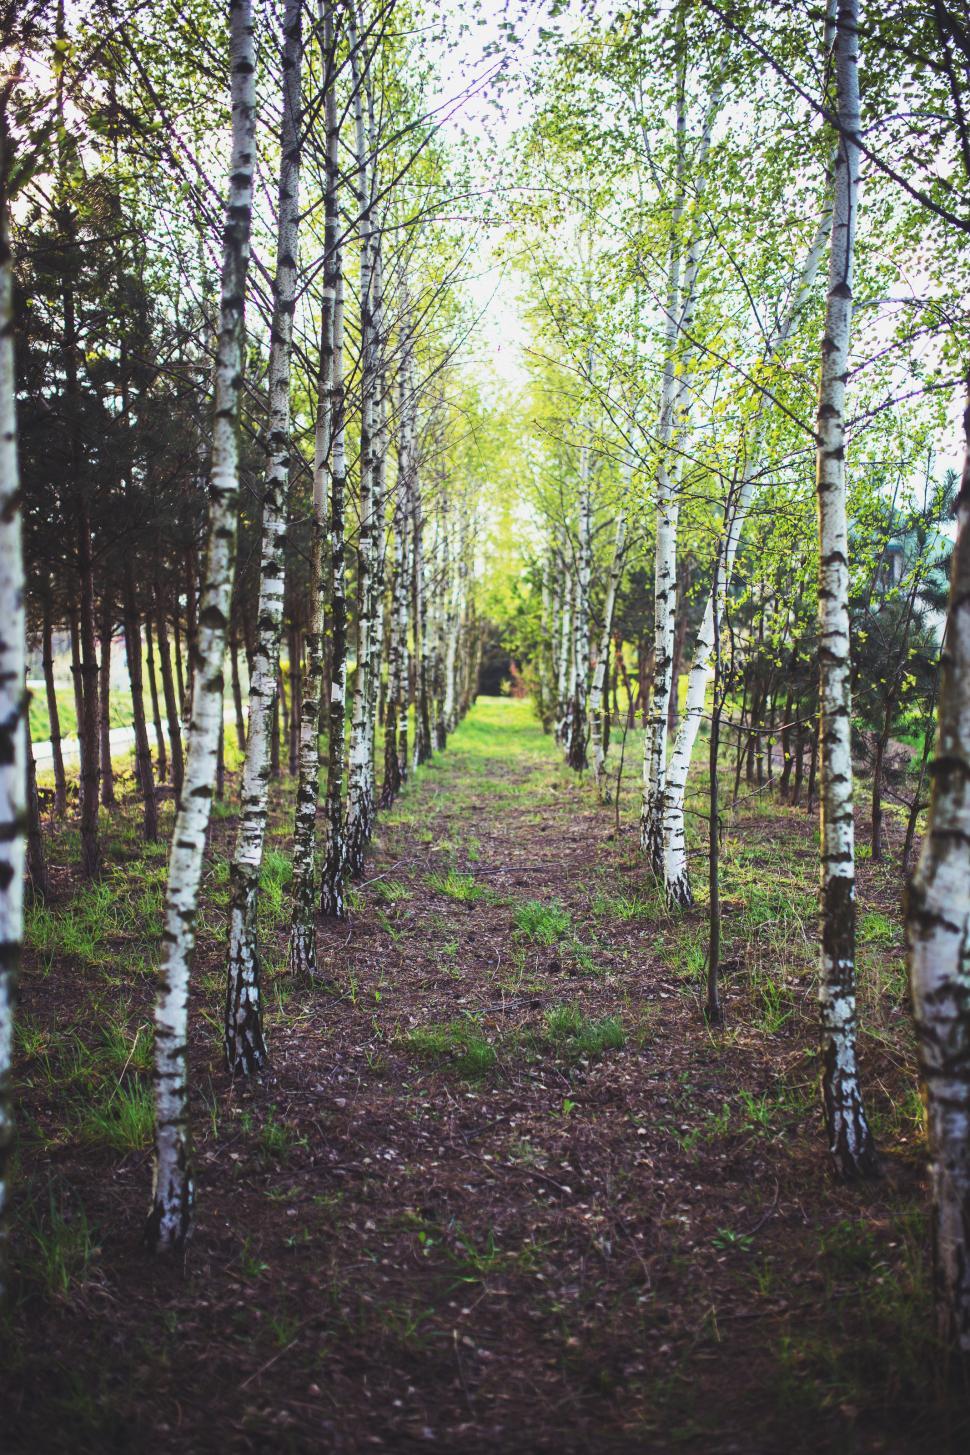 Free Image of Path Leading Through Grove of Trees in Forest 